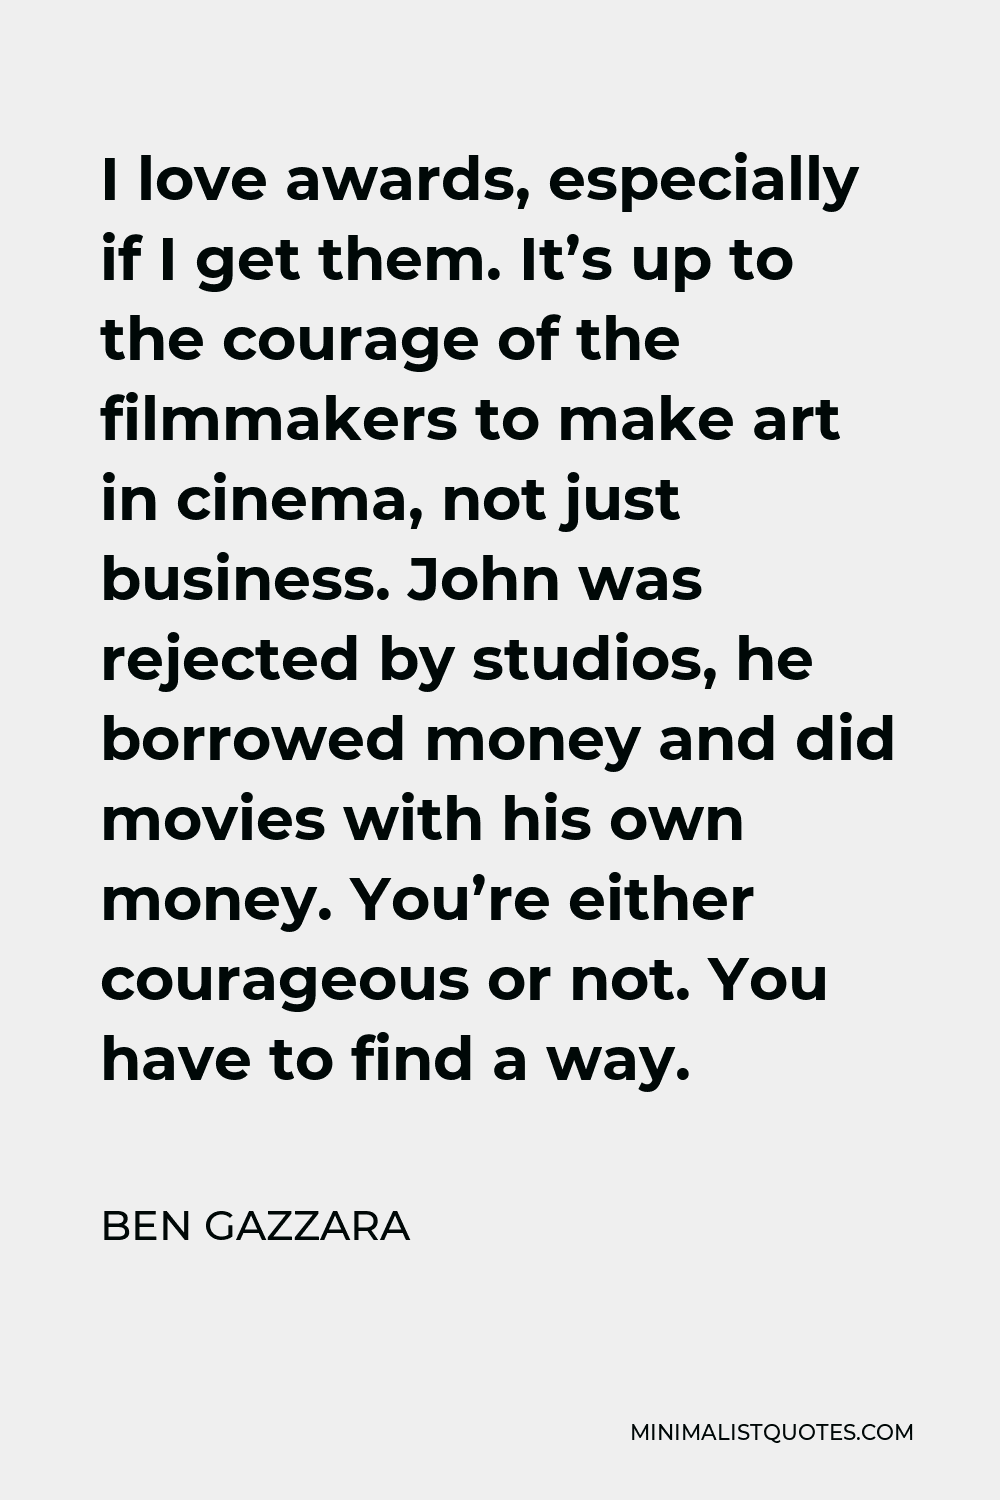 Ben Gazzara Quote - I love awards, especially if I get them. It’s up to the courage of the filmmakers to make art in cinema, not just business. John was rejected by studios, he borrowed money and did movies with his own money. You’re either courageous or not. You have to find a way.